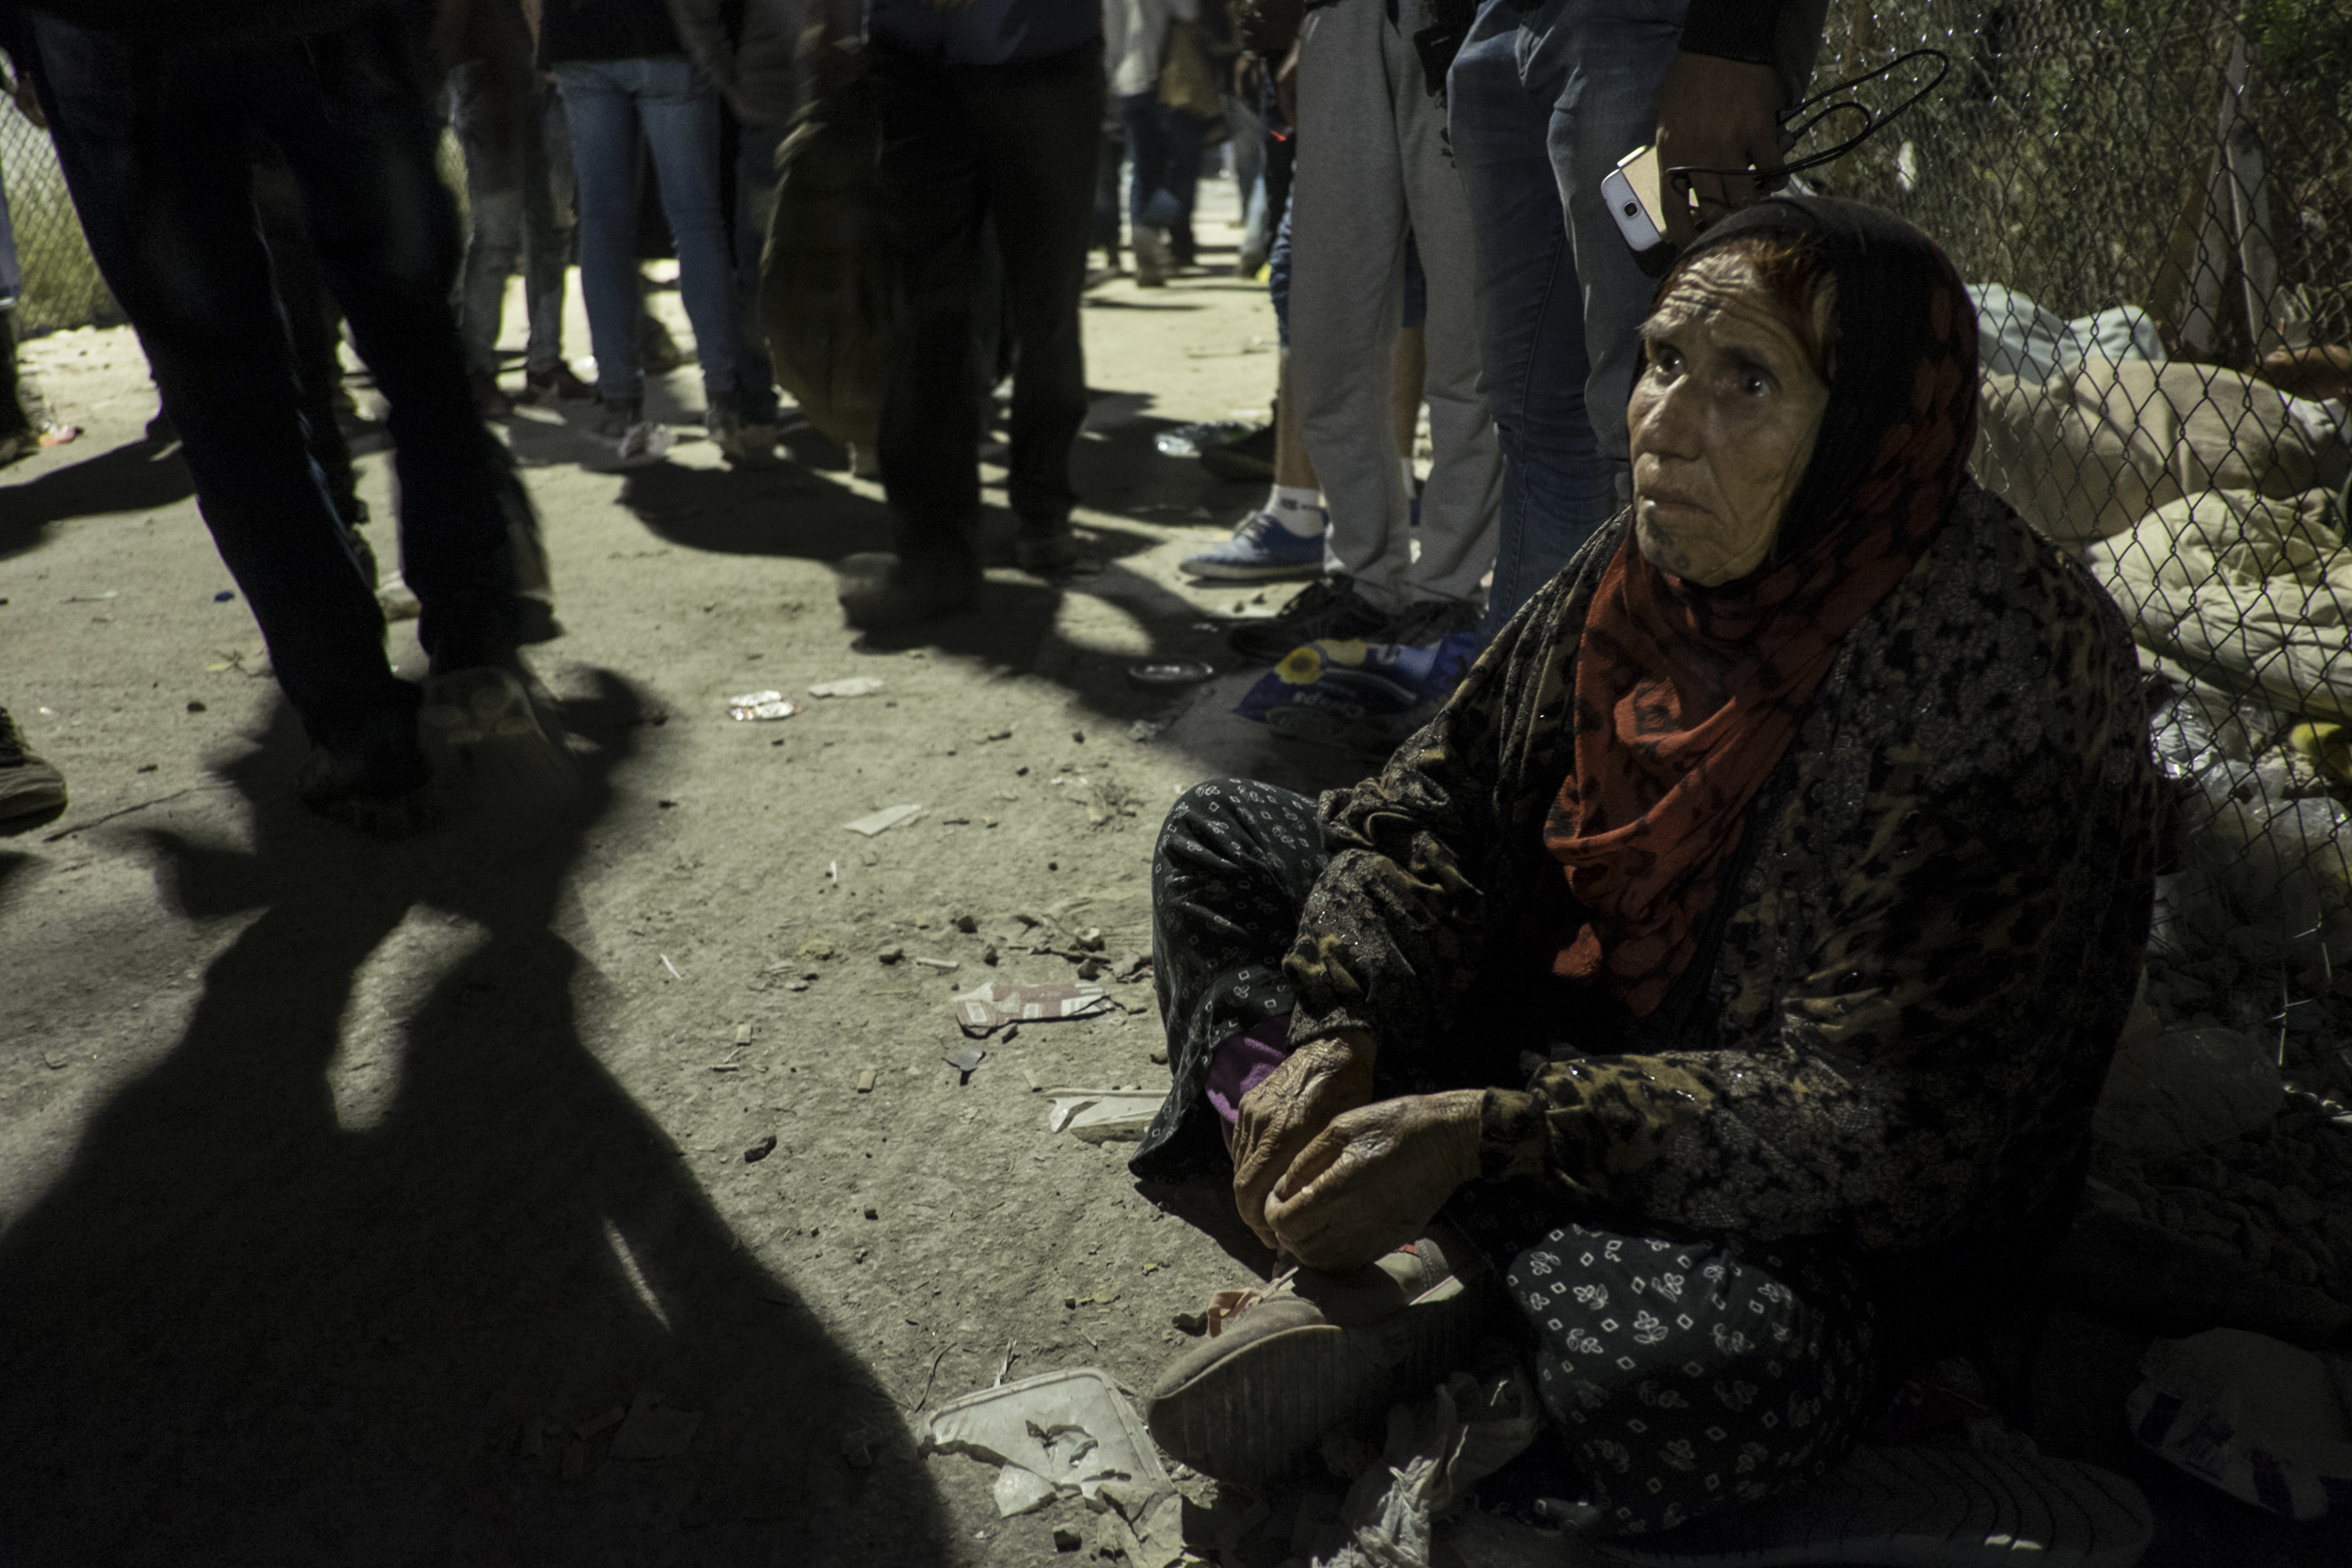   An elderly Syrian Kurdish woman outside Moria. The elderly and infirm often lose their places in the line.  